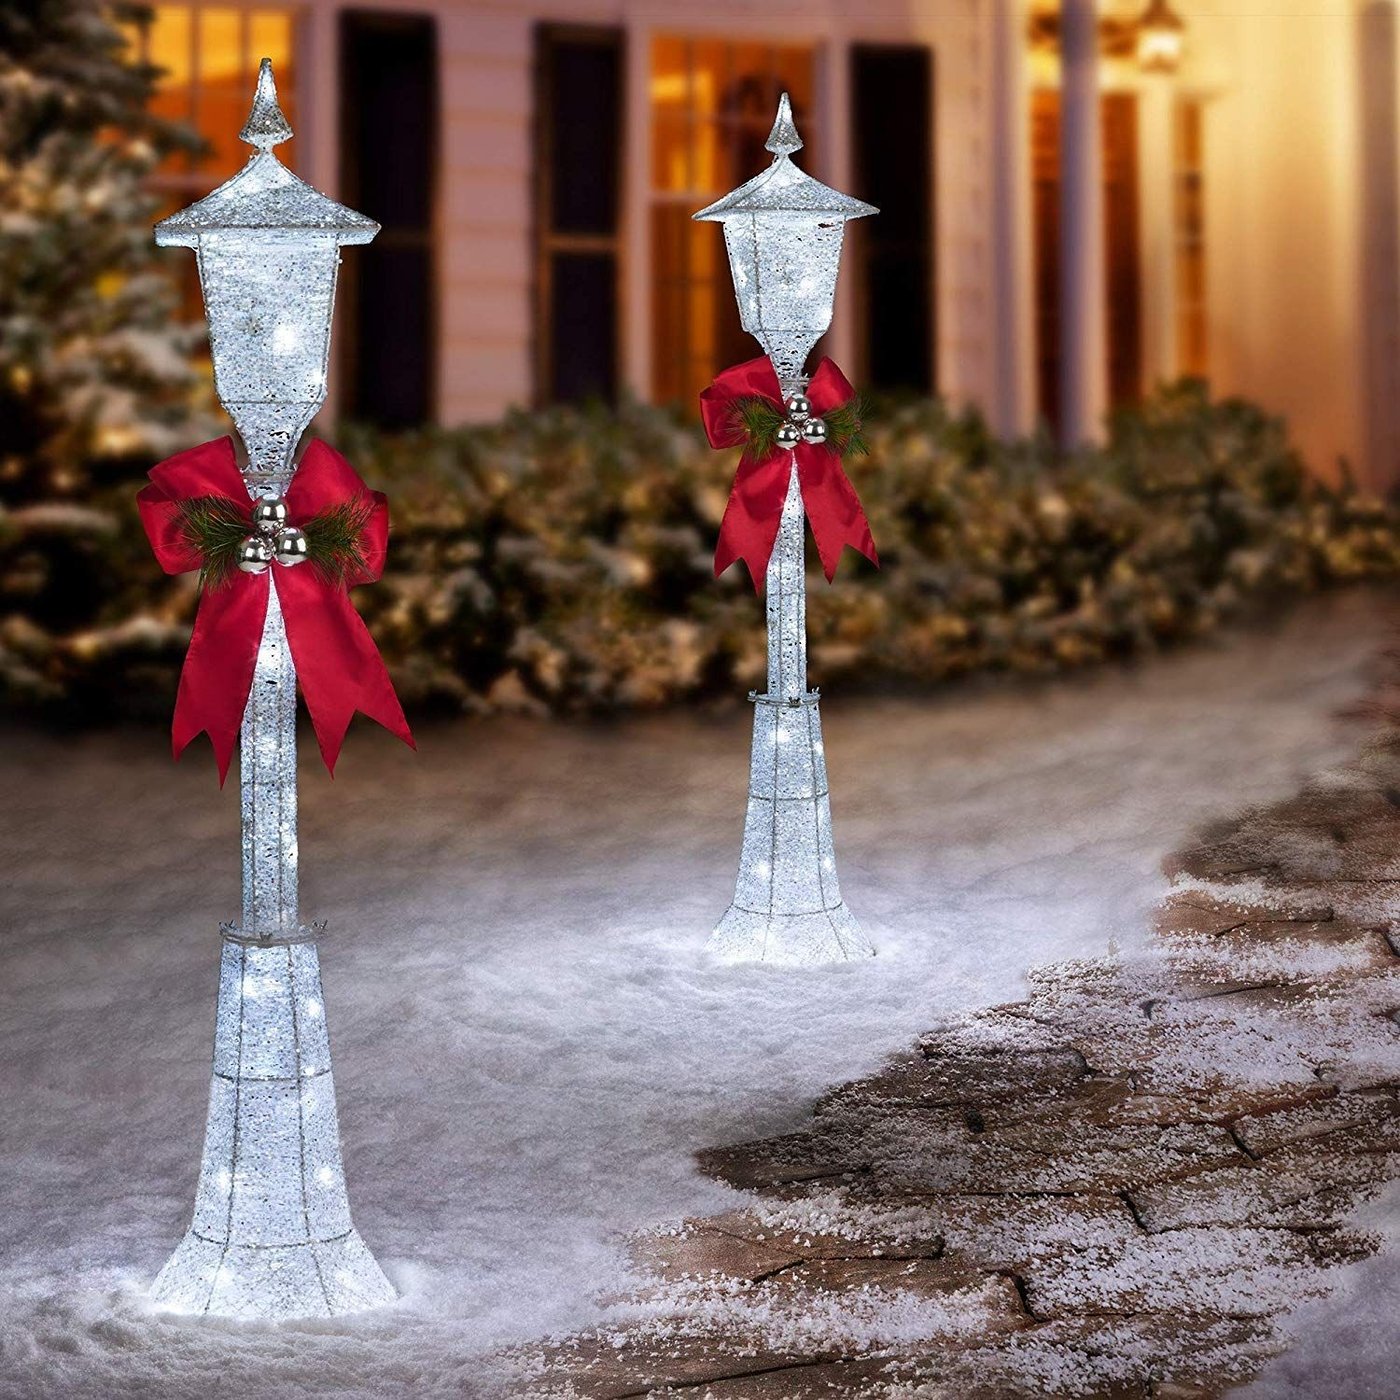 13 Outdoor Lighted Displays to Cheer You Up This Christmas - Foter